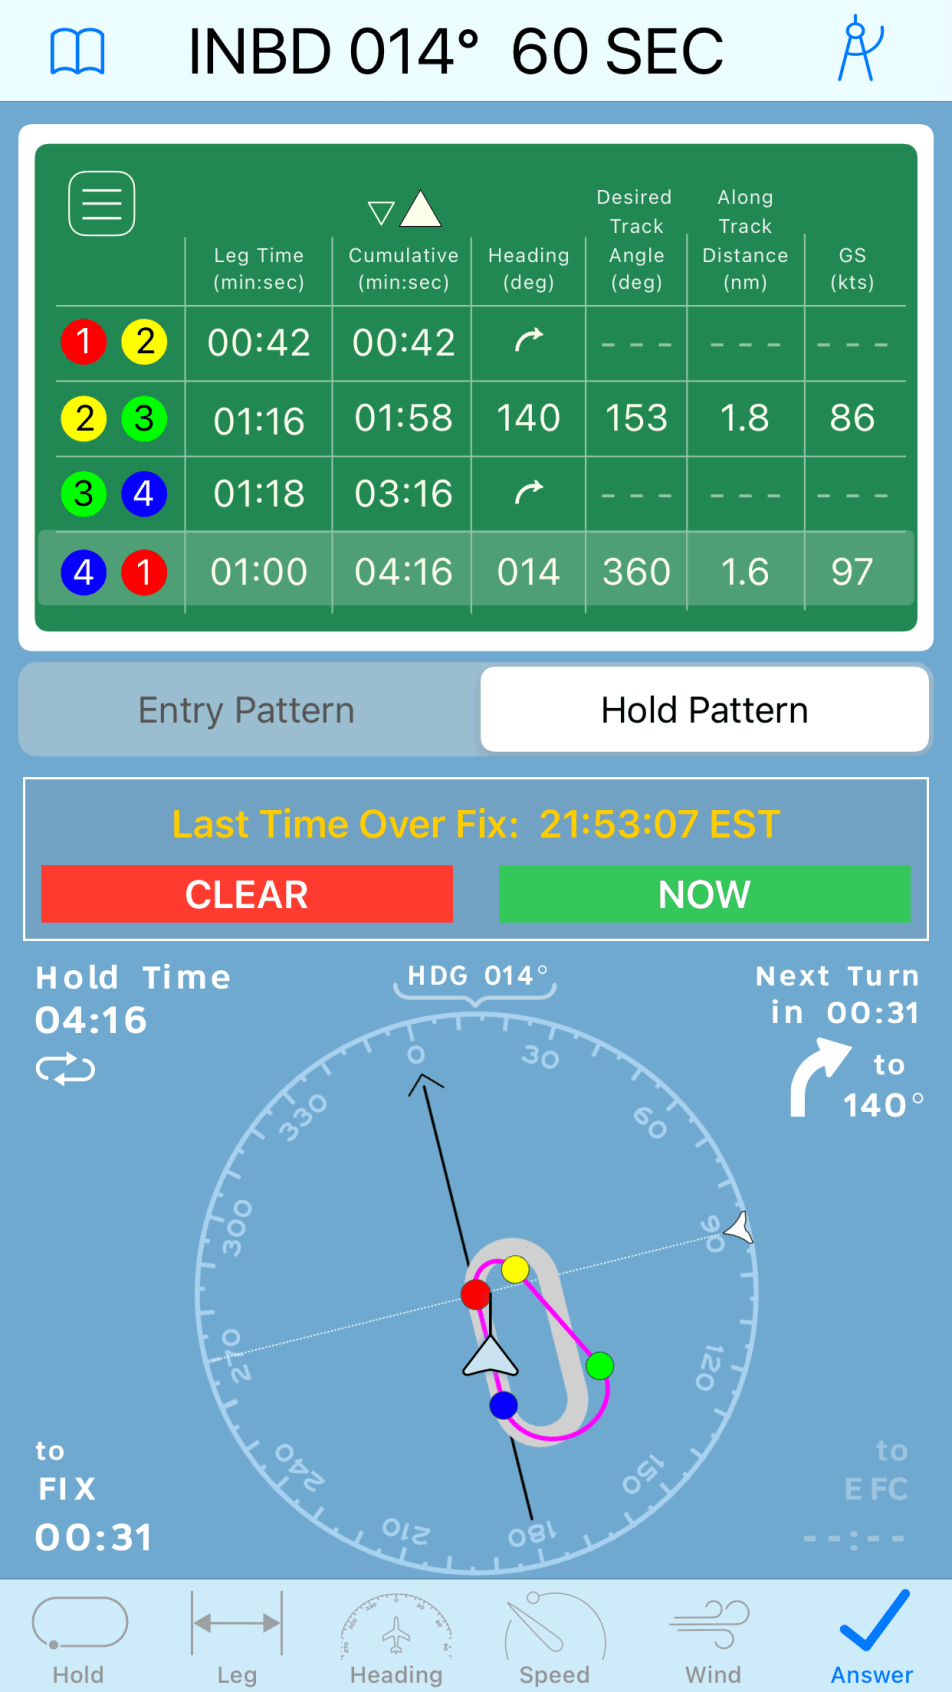 Holding Pattern Computer - Hold Pattern Tab